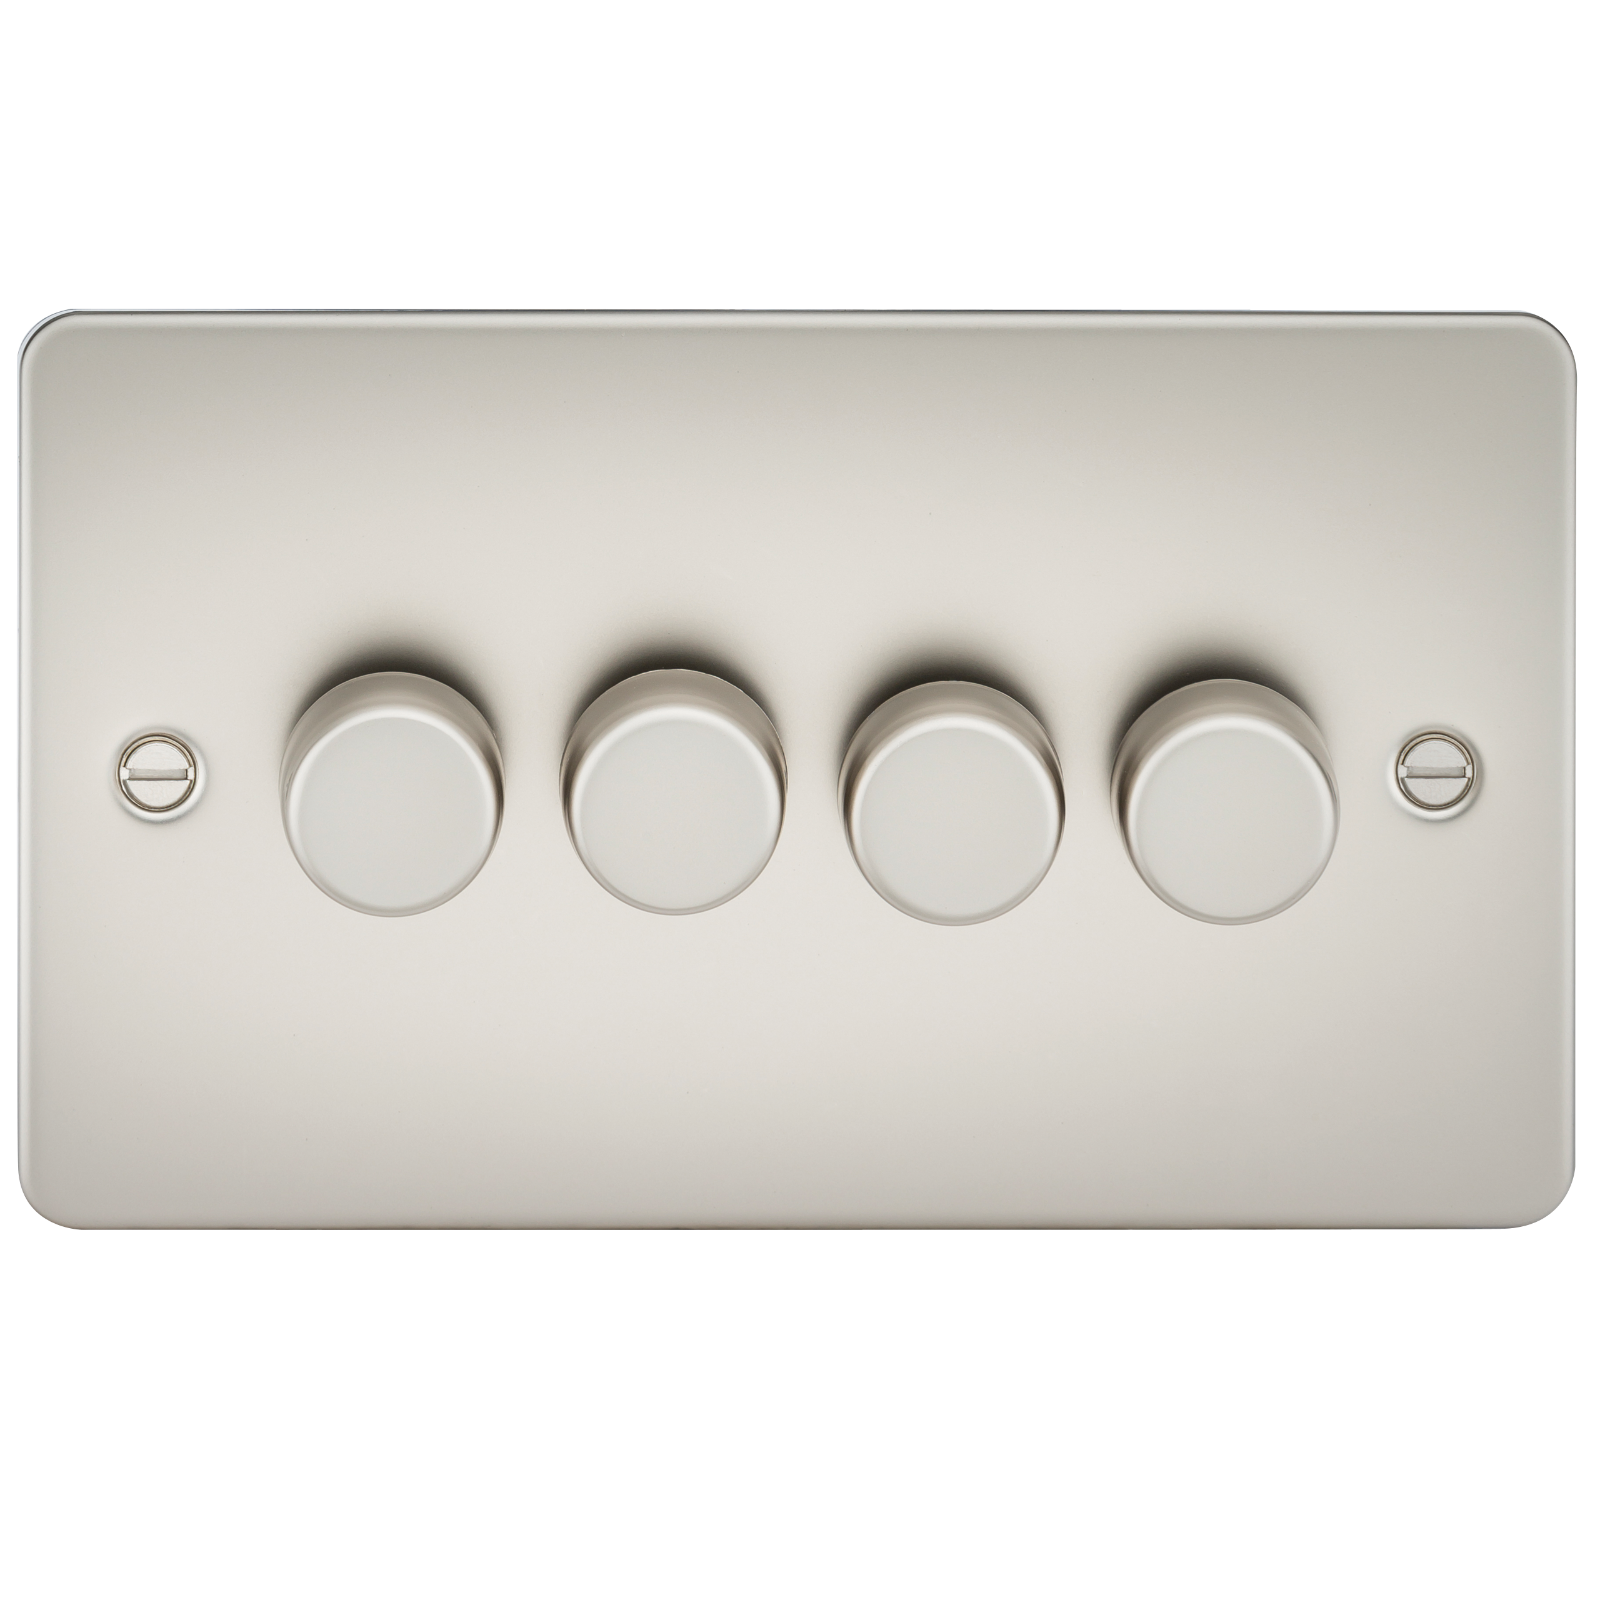 Flat Plate 4G 2 Way Dimmer 60-400W - Pearl - FP2164PL 